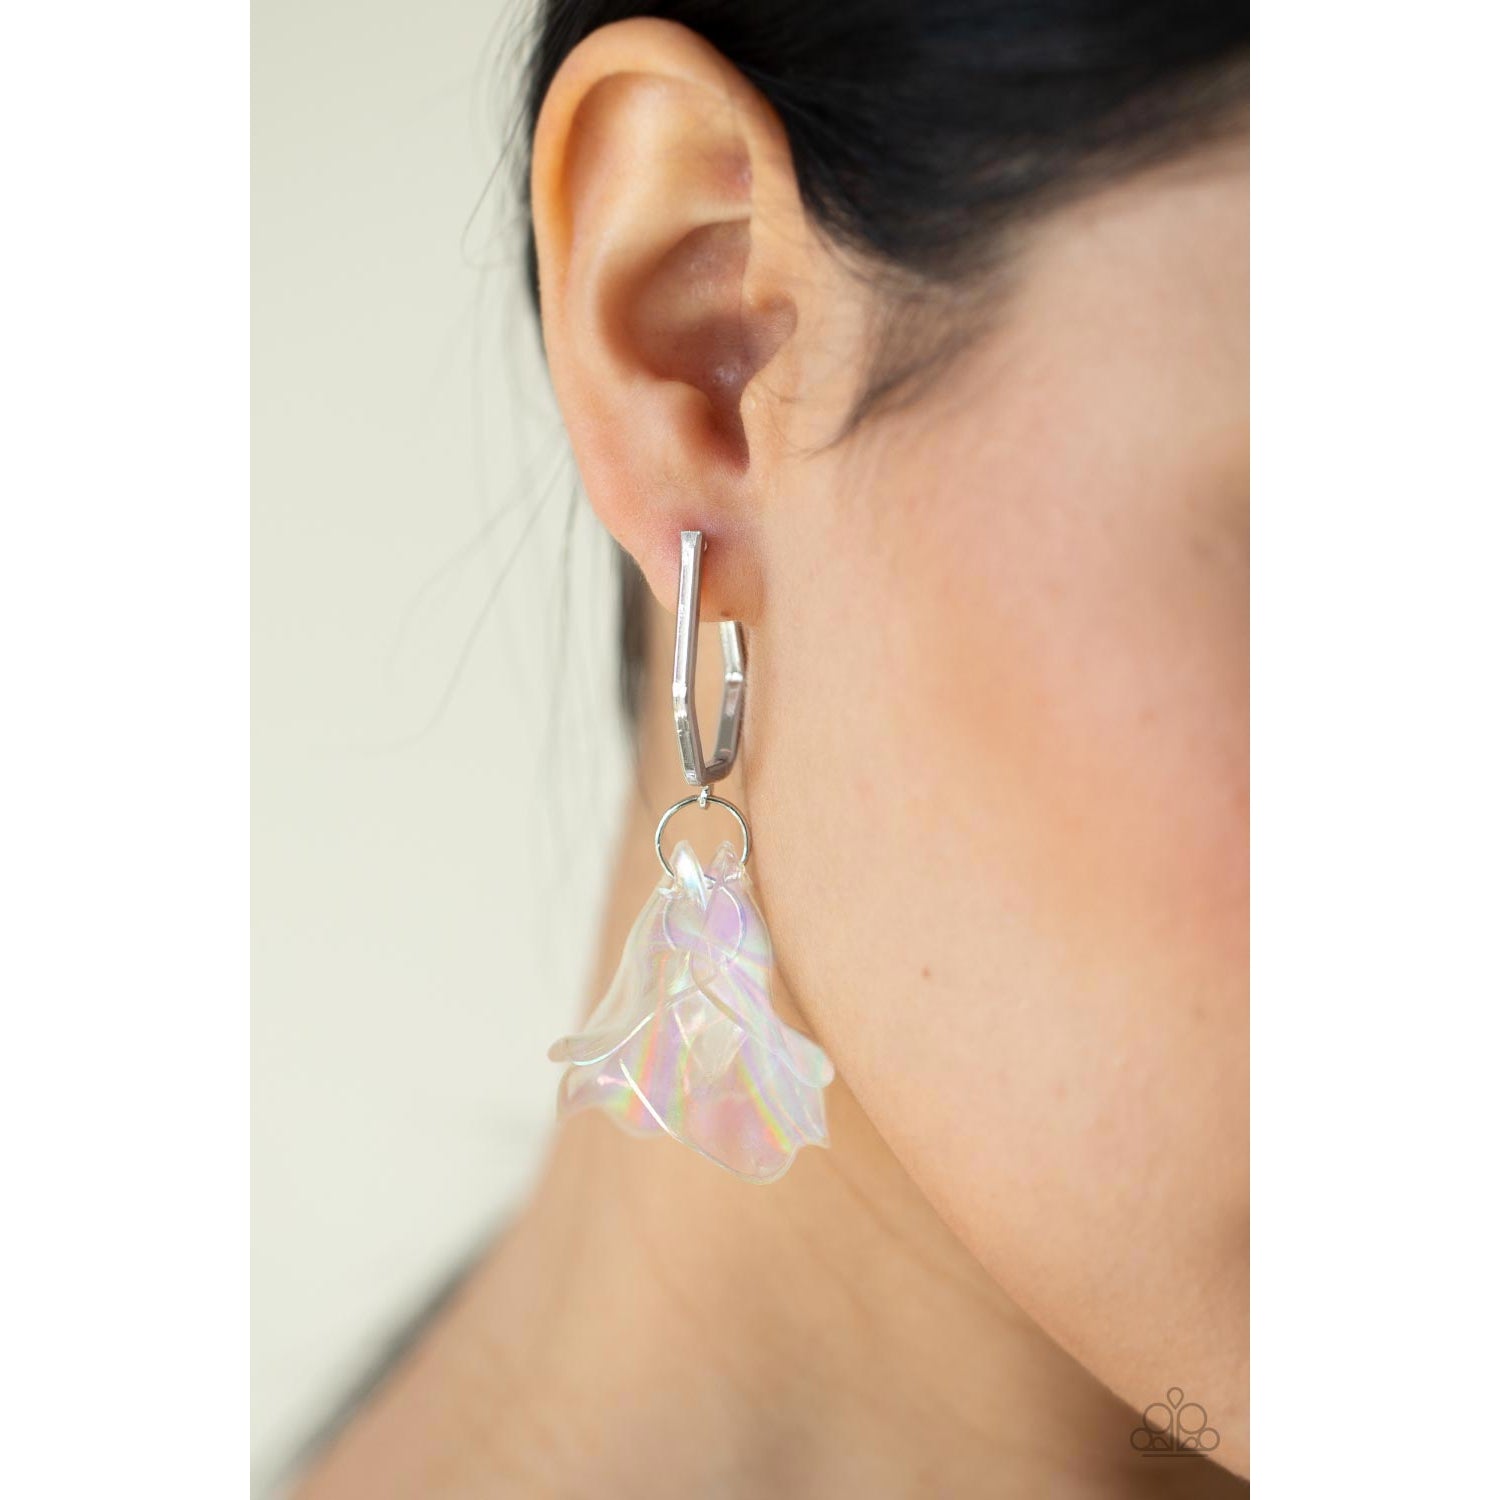 Jaw-Droppingly Jelly - Silver Iridescent Earrings - Paparazzi Accessories - GlaMarous Titi Jewels